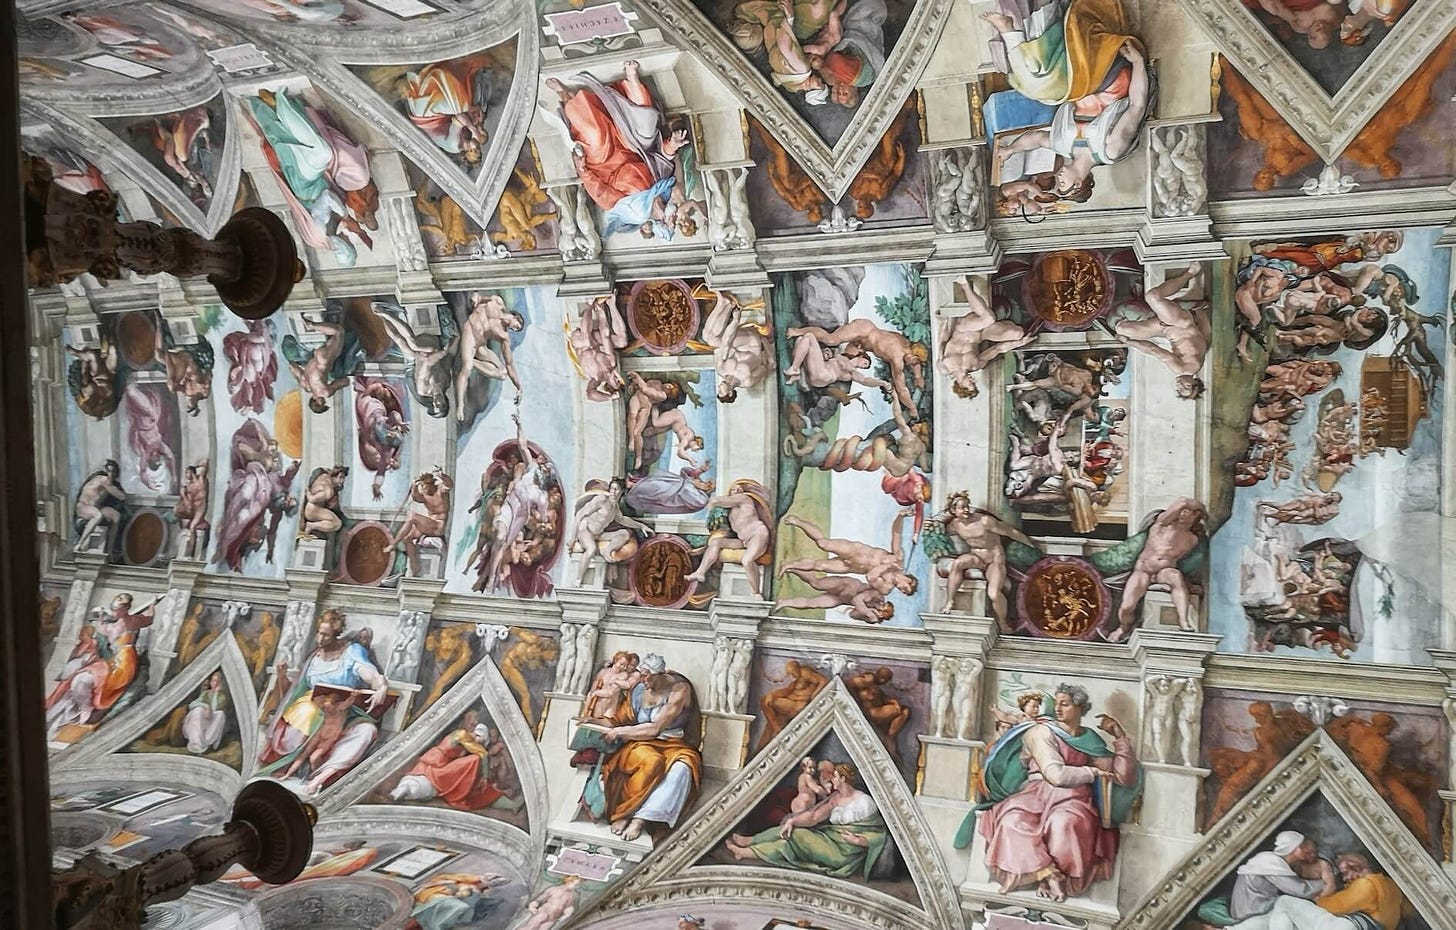 10 things about the Sistine Chapel - Through Eternity Tours